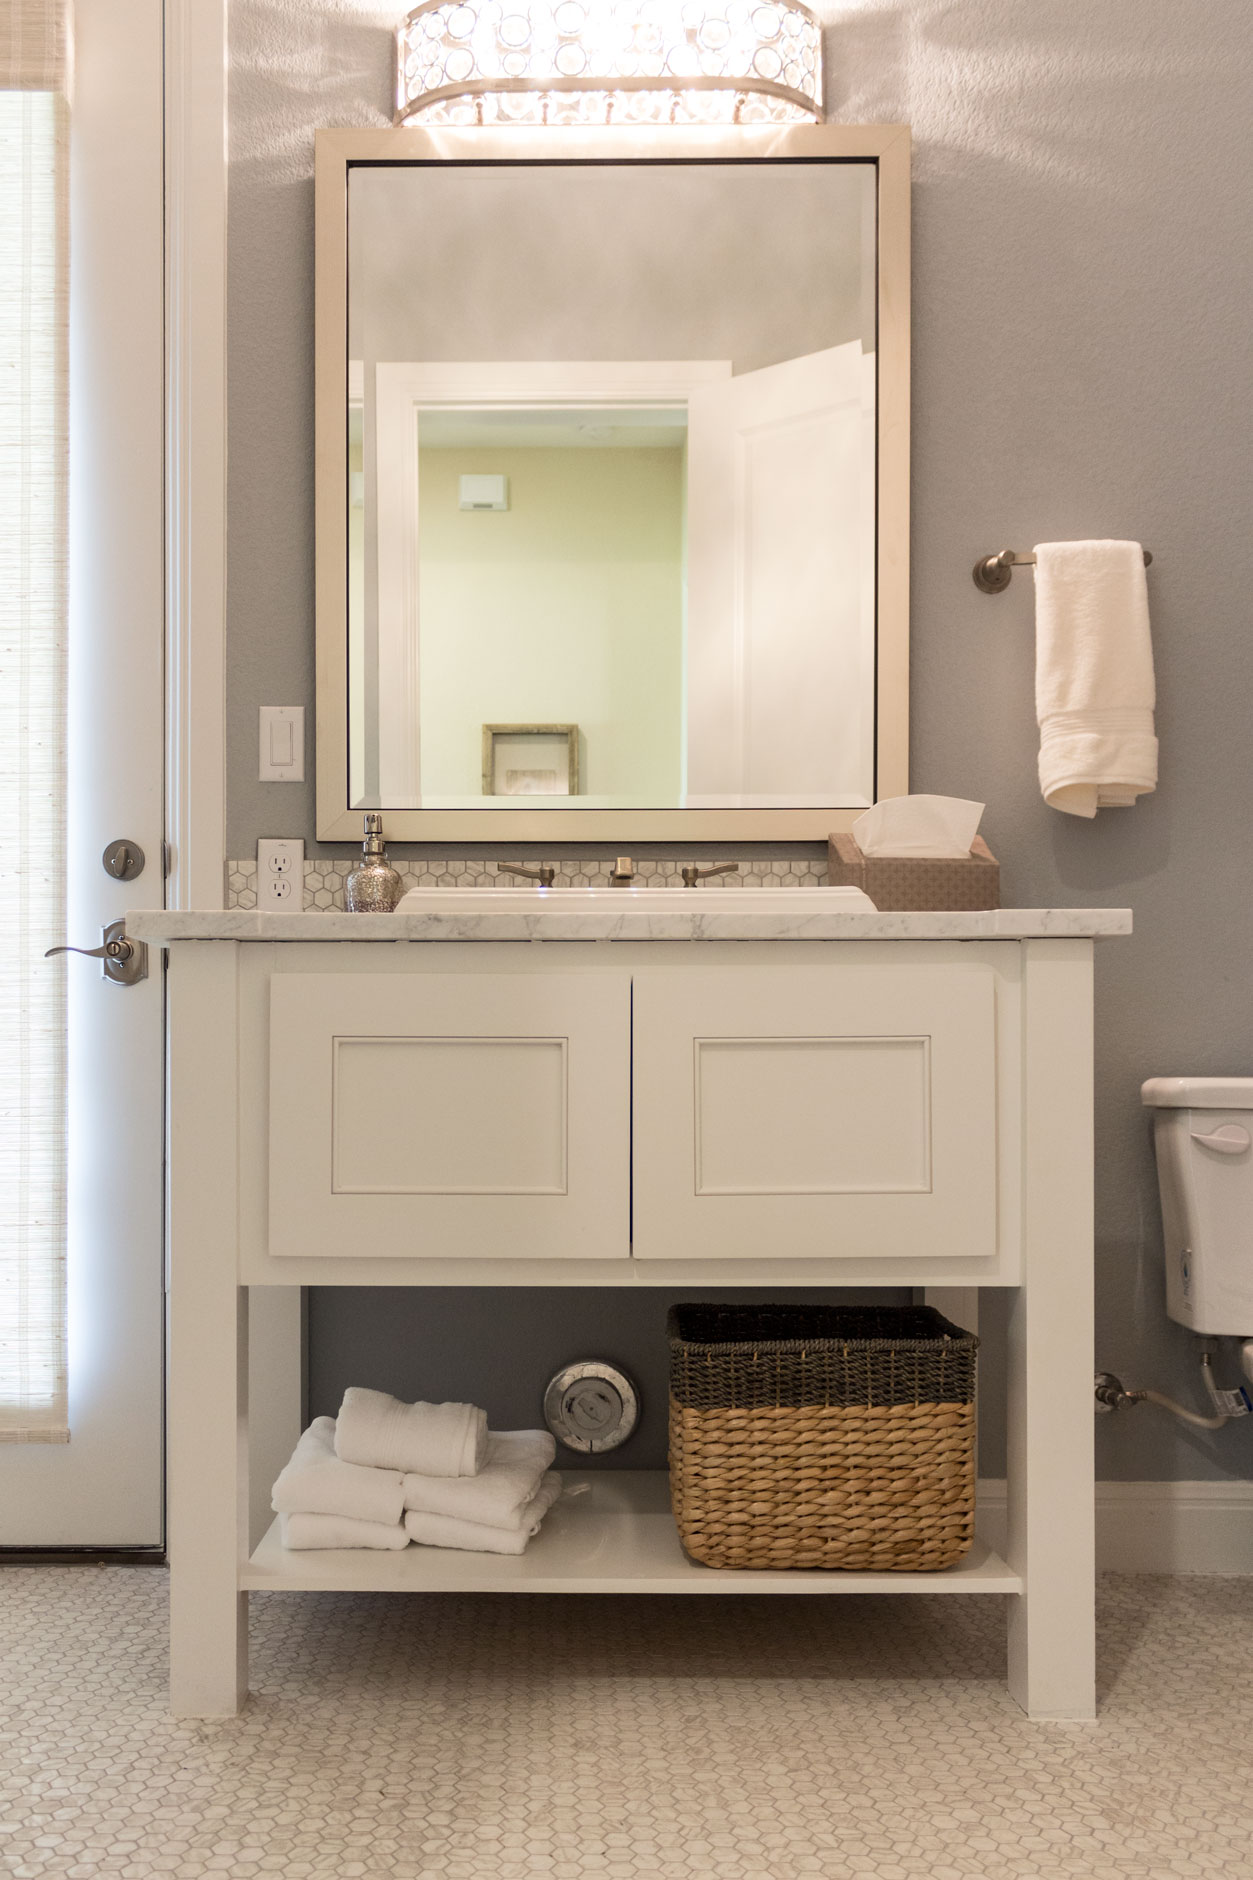 Powder Room Vanity 09 - Burrows Cabinets - Texas builder-direct cabinets